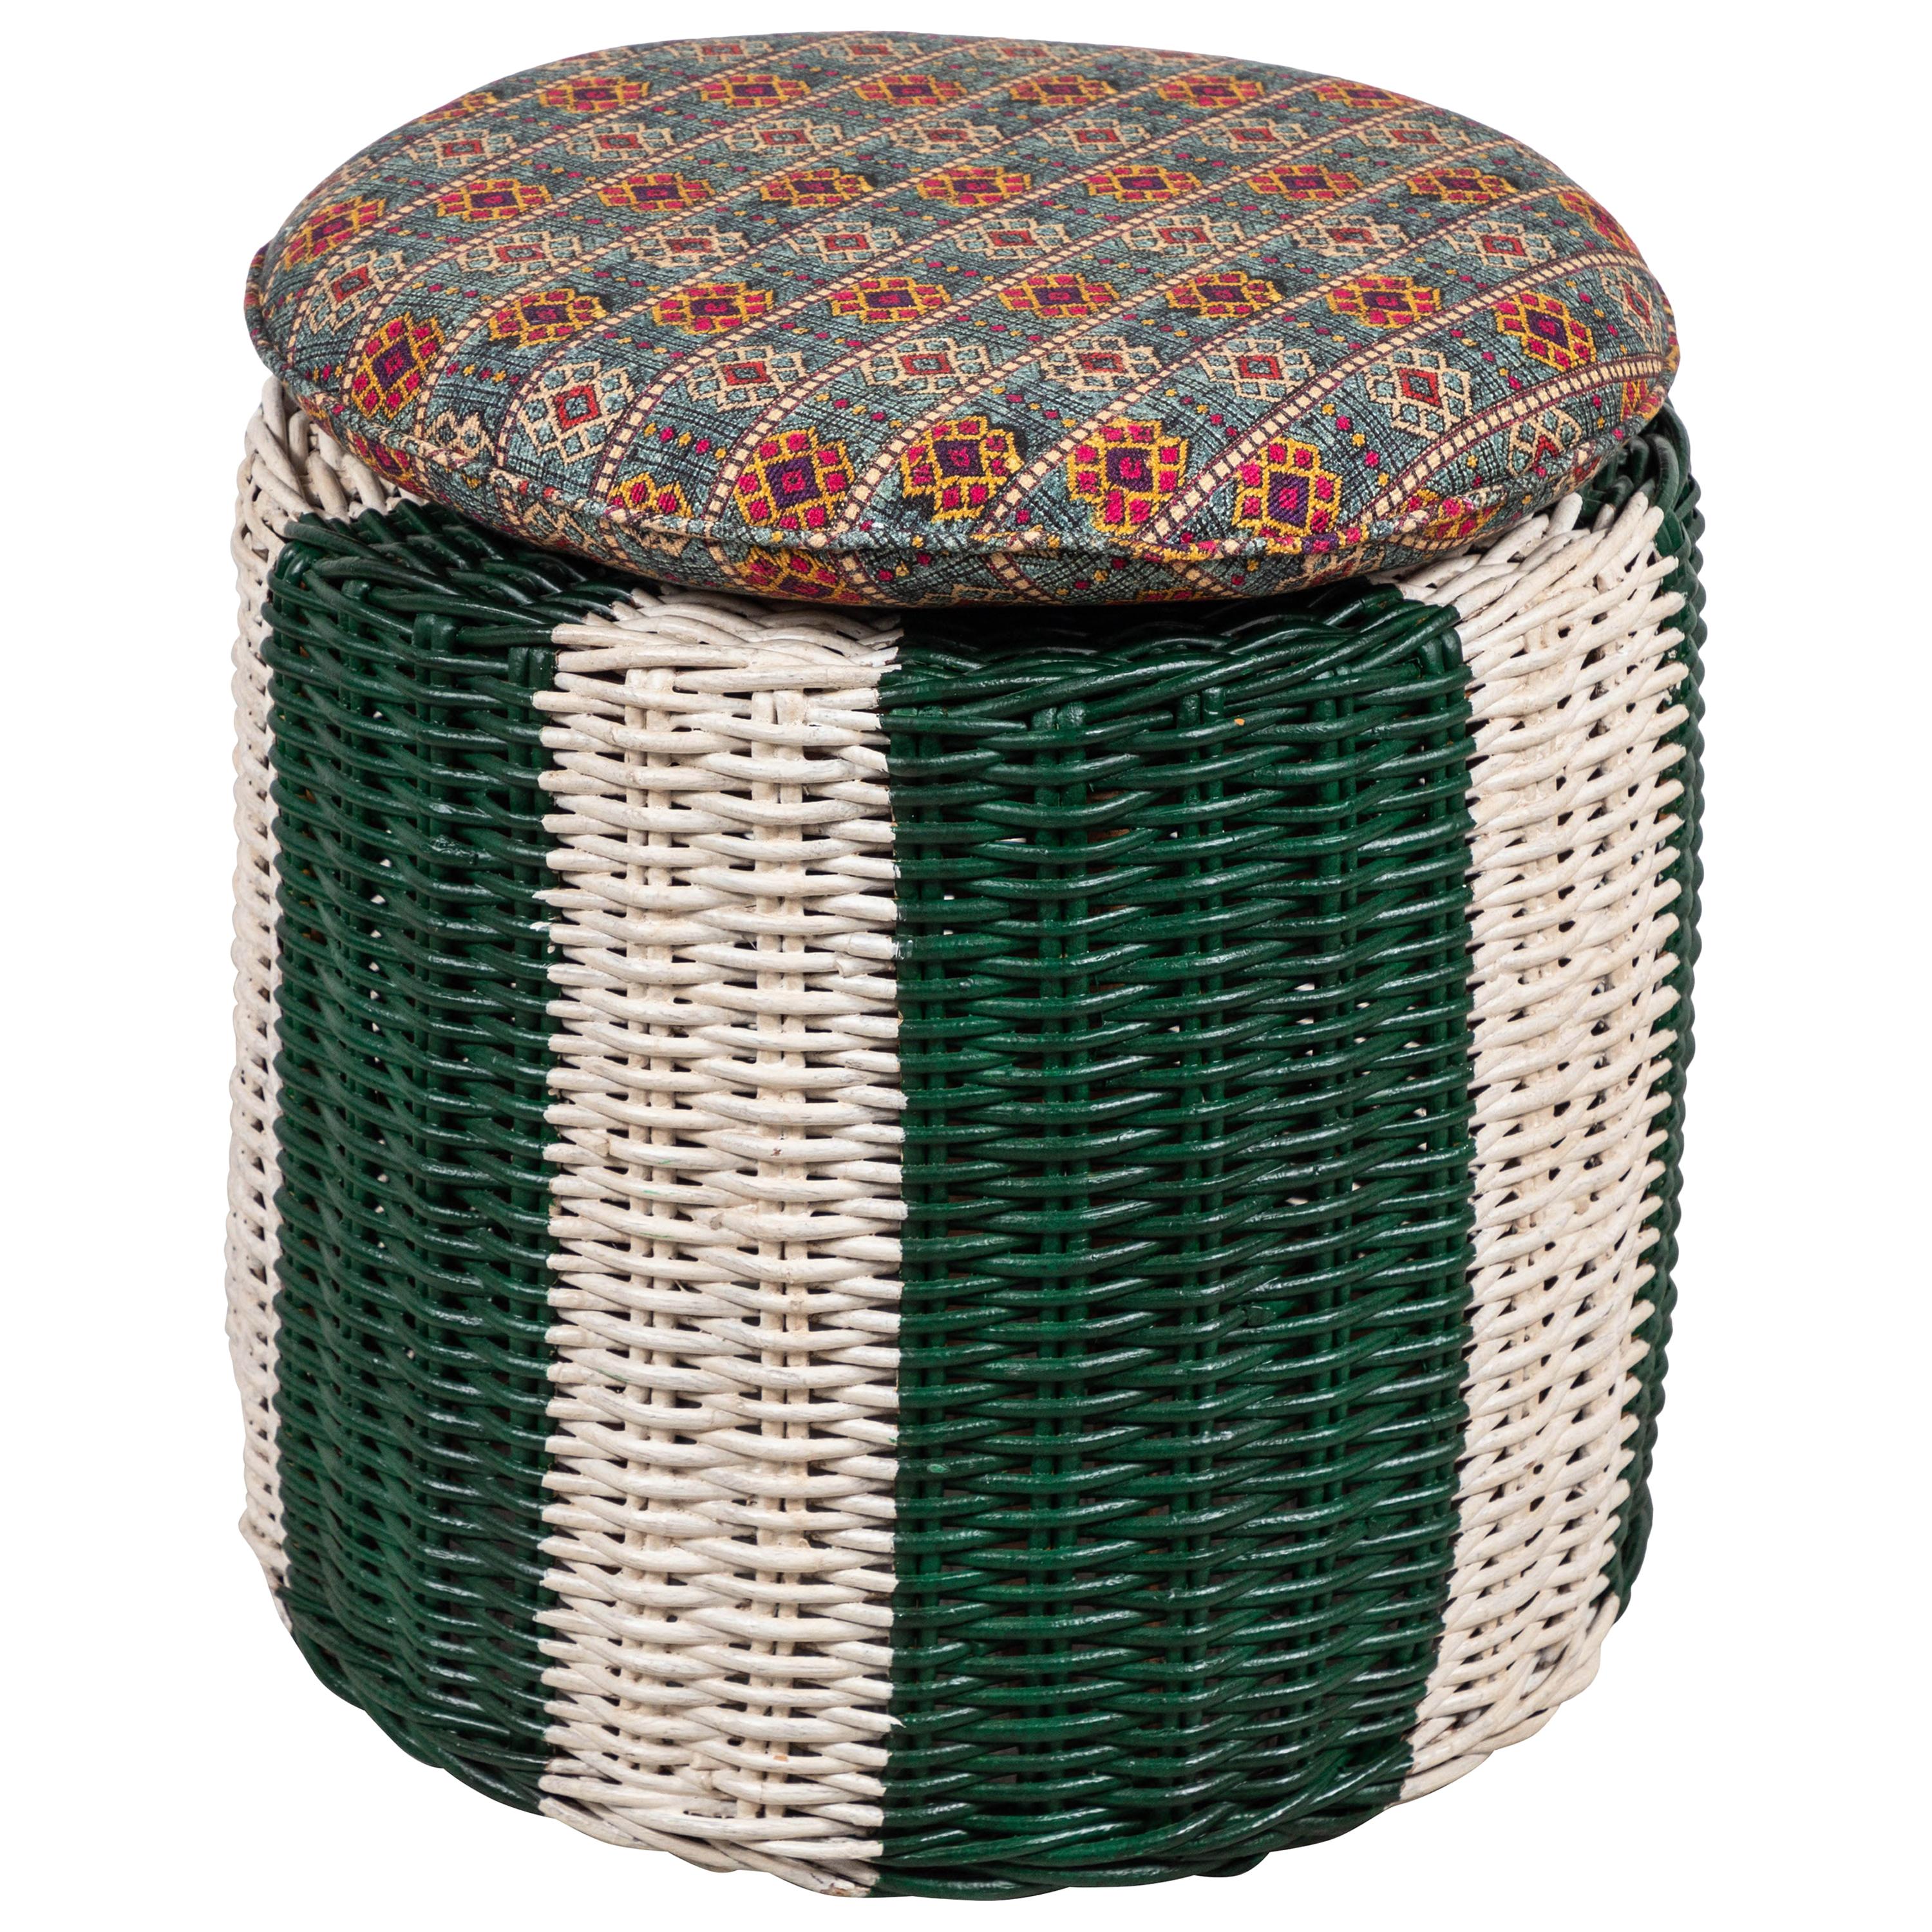 Green and White Painted Wicker Ottoman with Colorful Pillow Topped Cushion